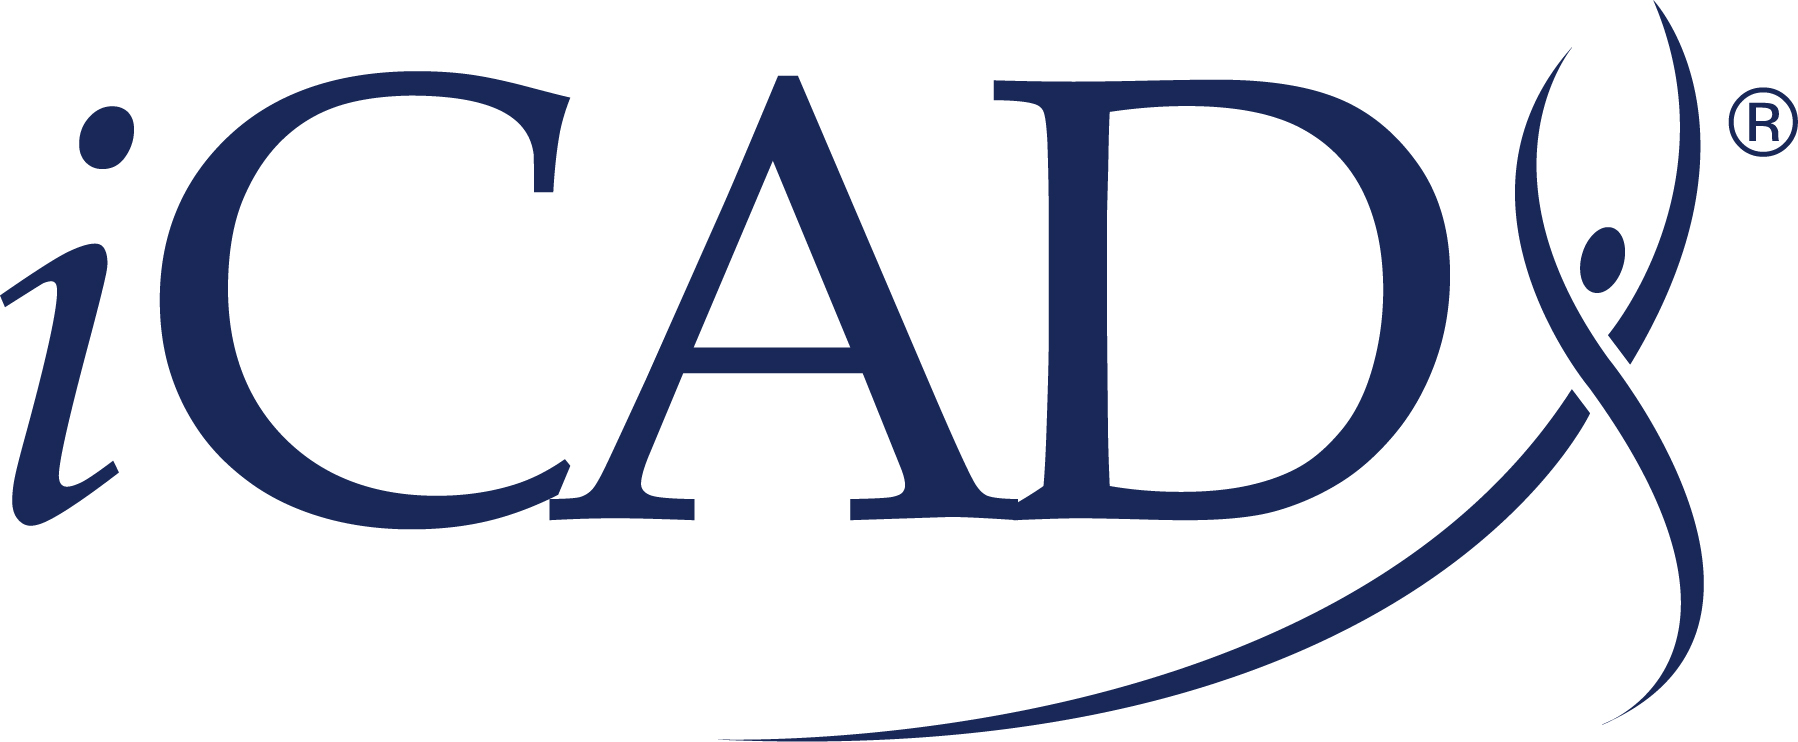 iCAD Offers ROI Analysis Based on Real-World Results from its ProFound Breast AI Suite at AHRA Annual Meeting